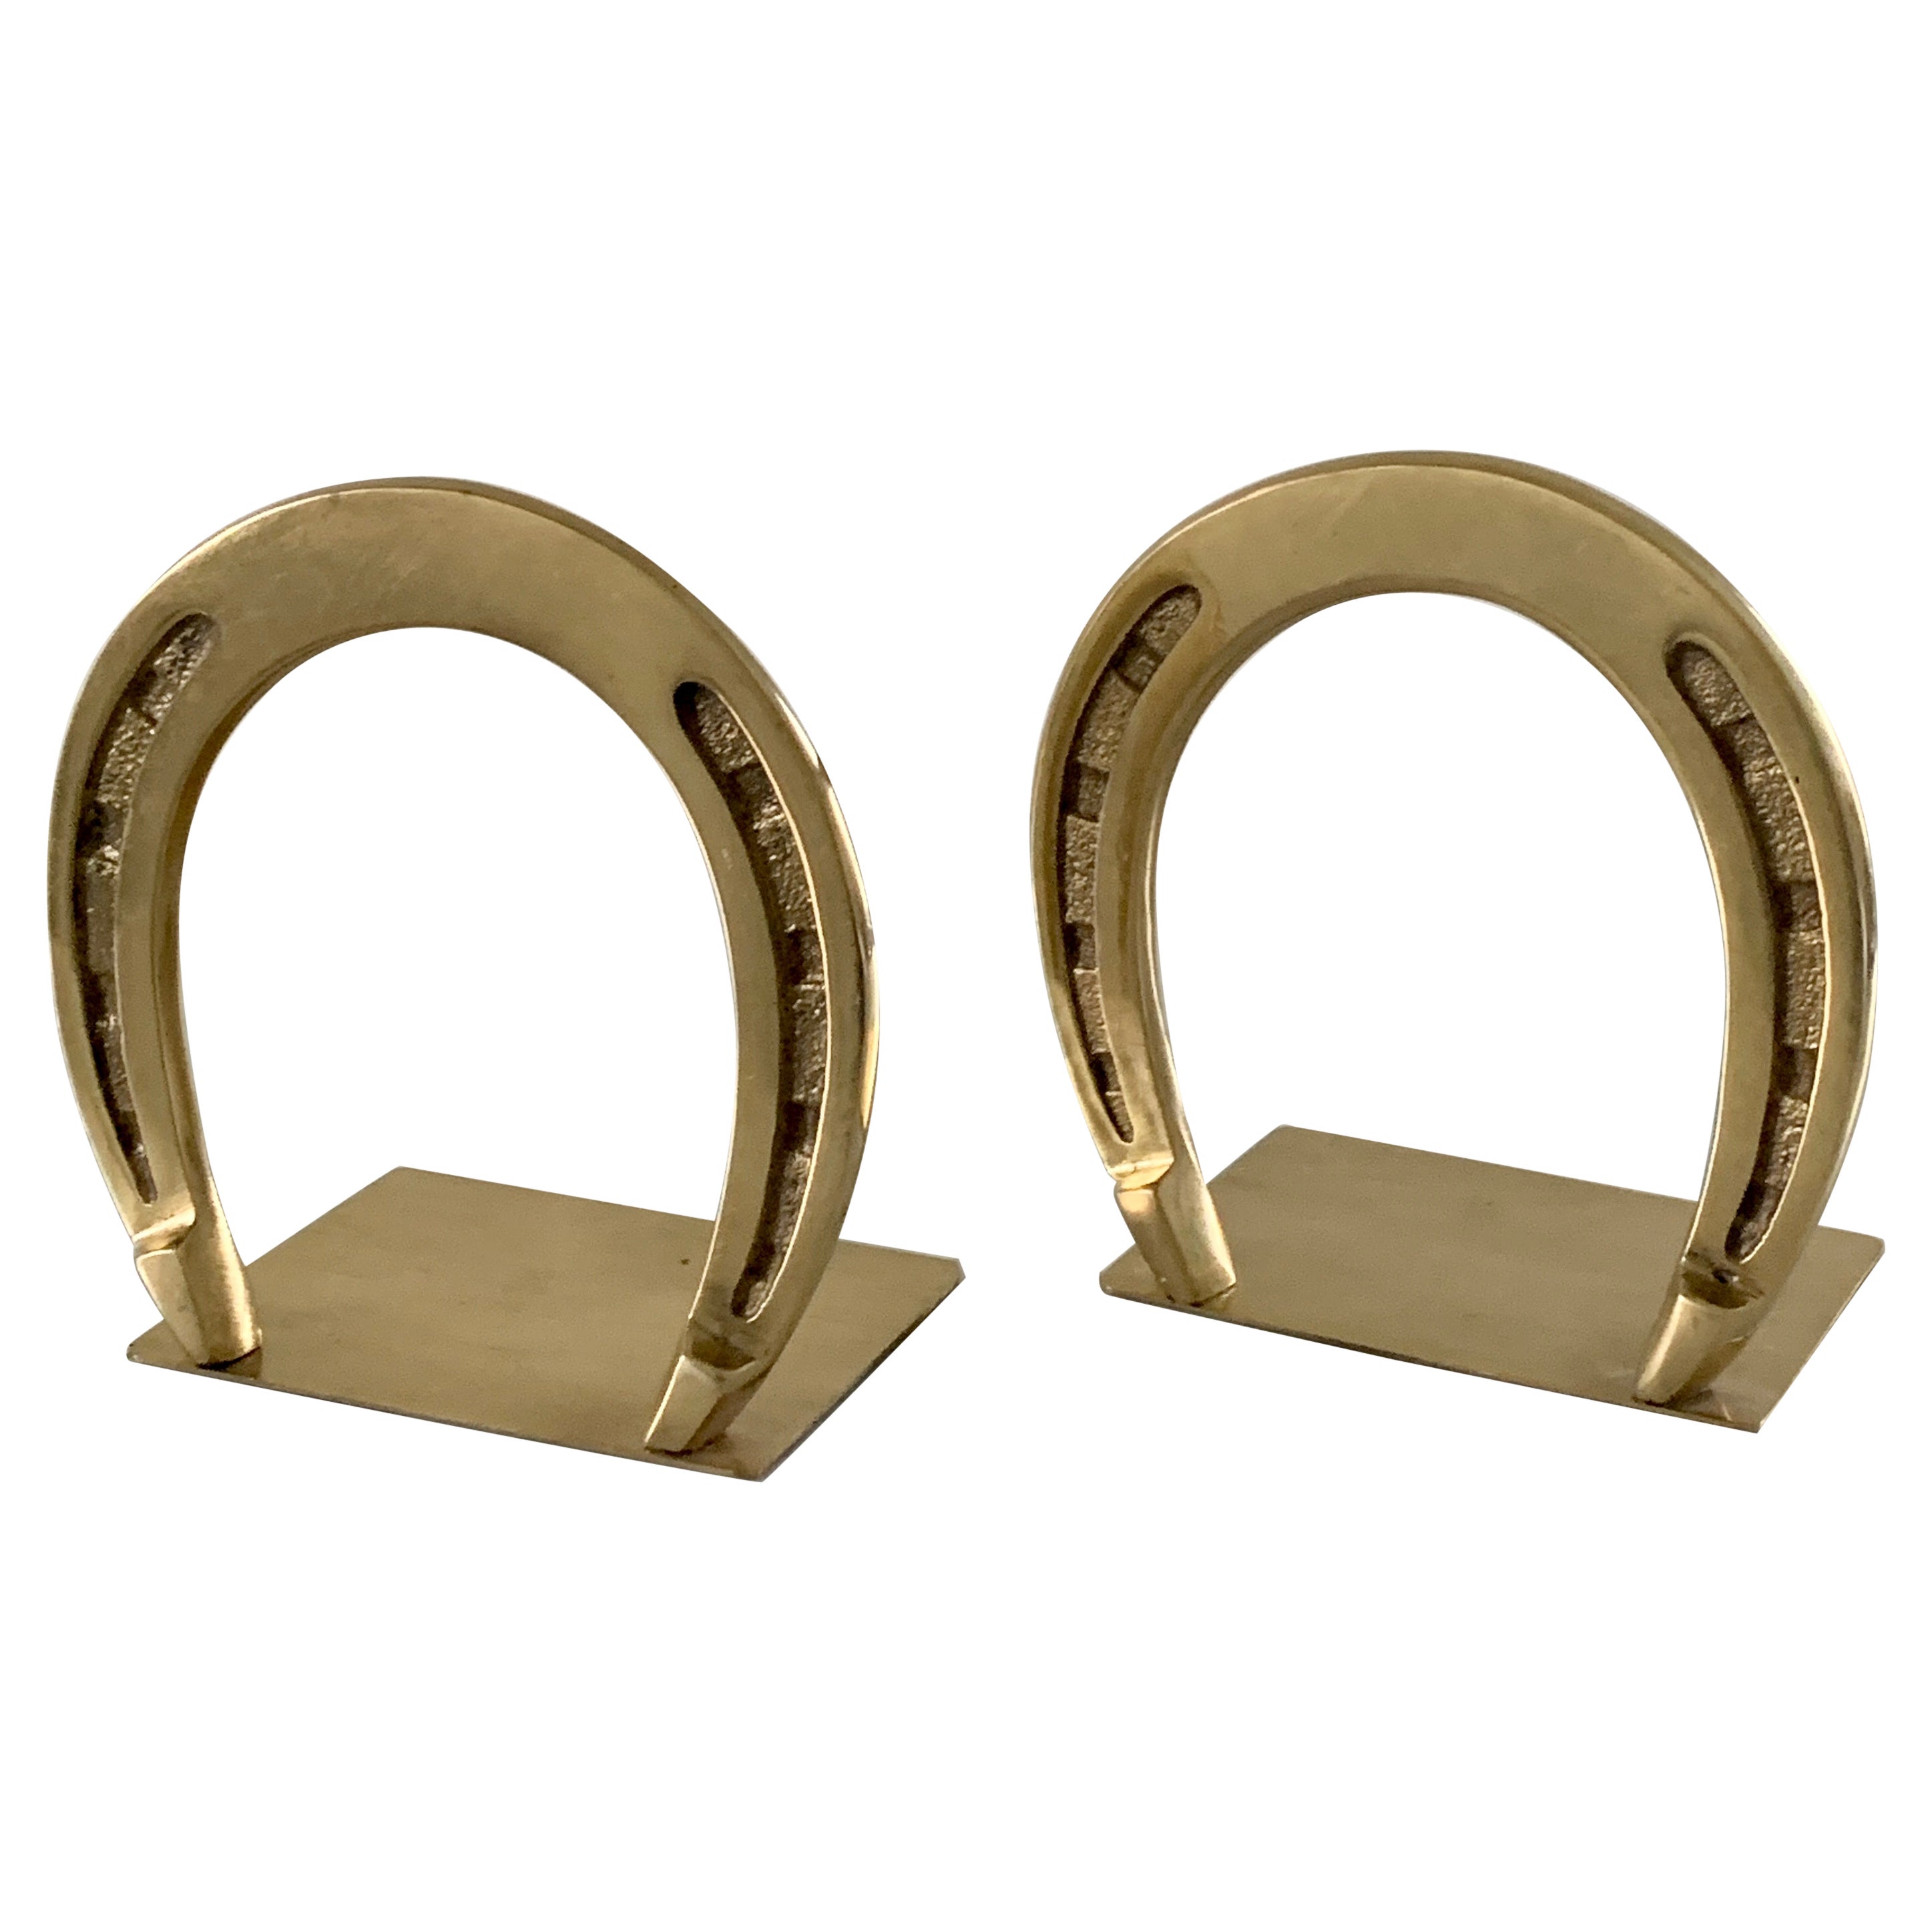 Solid Cast Brass Horseshoe Bookends For Sale